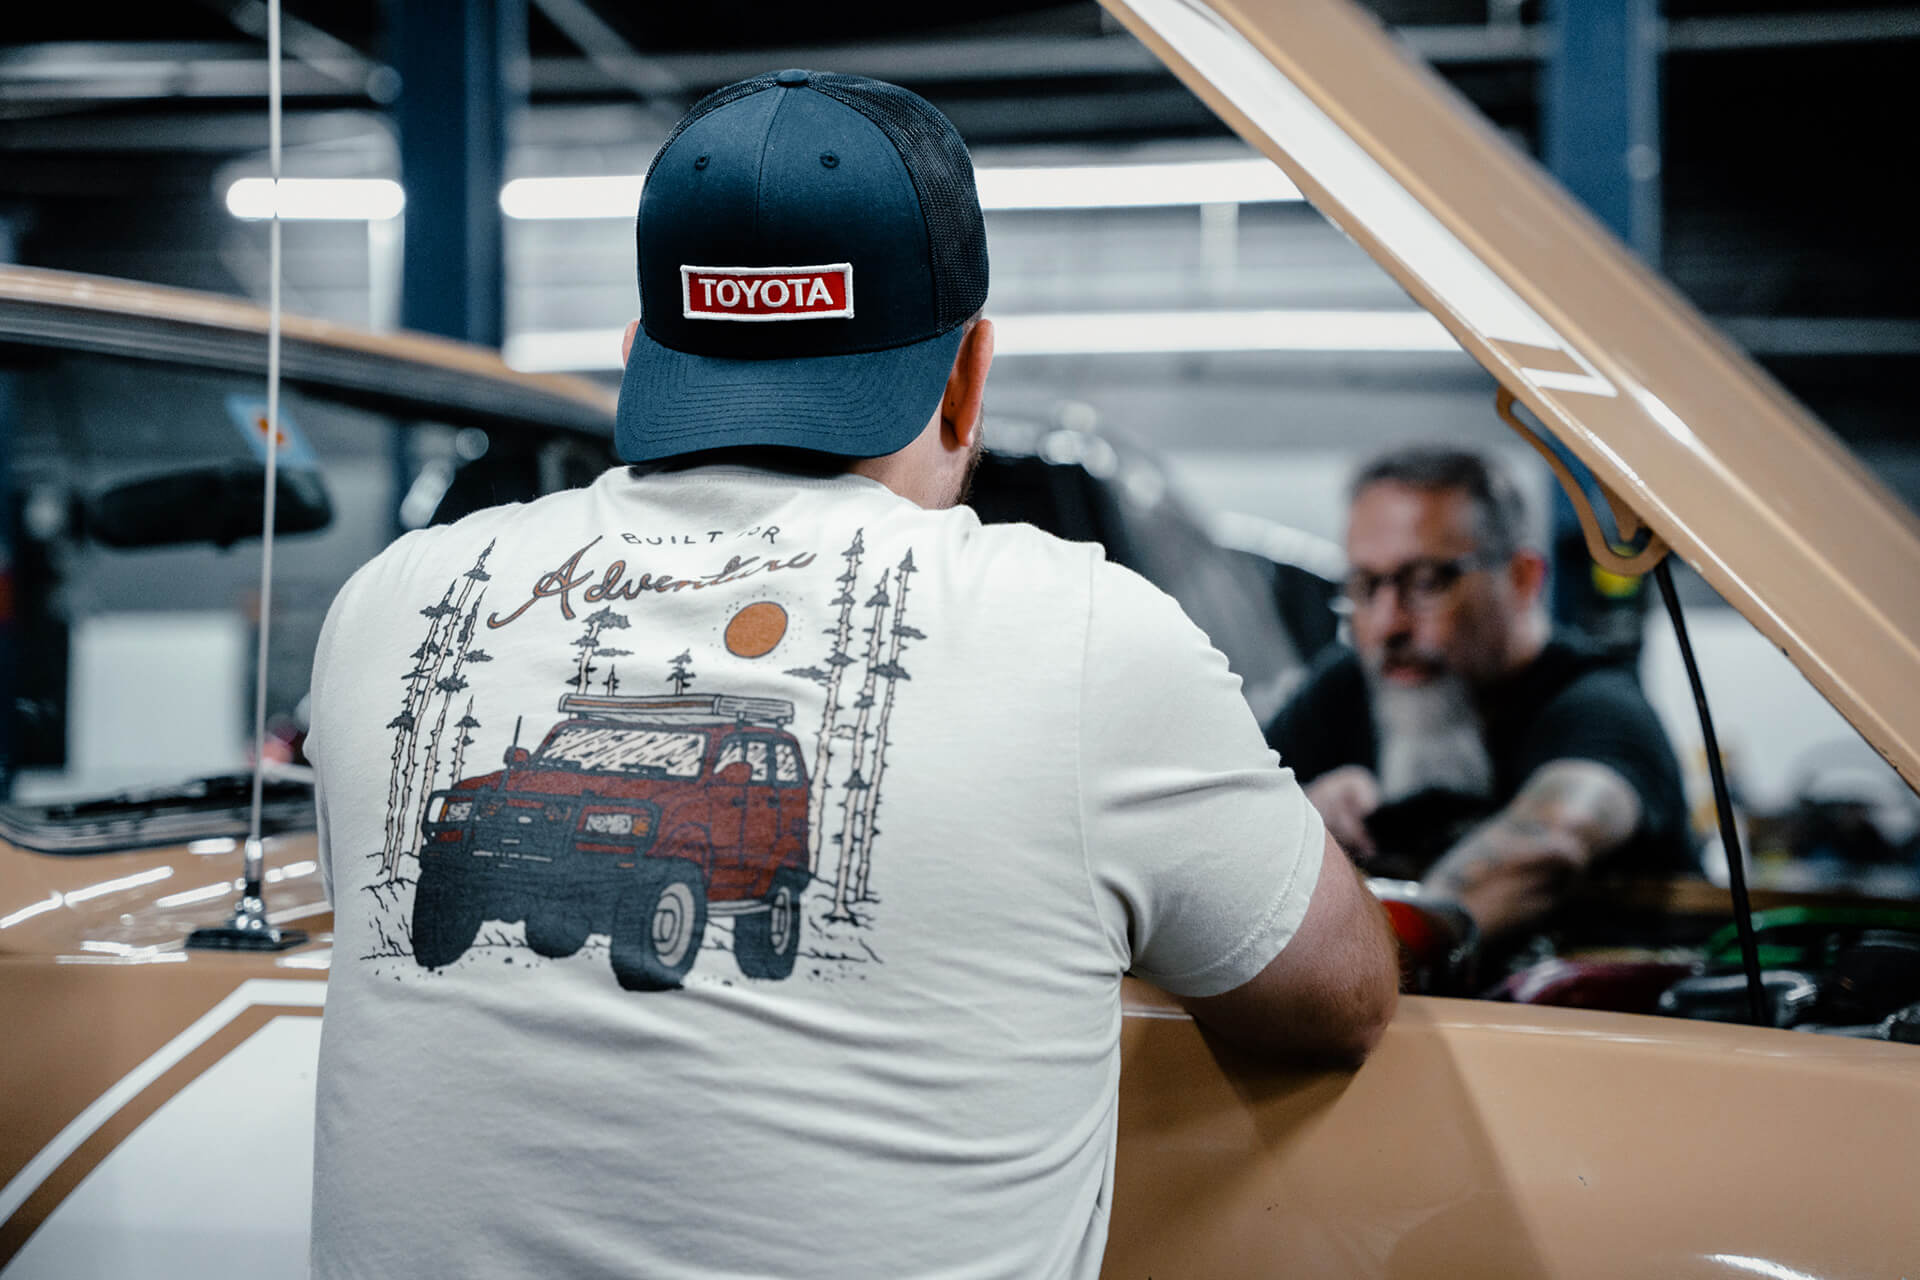 Picture from behind showing the back of a white built for adventure shirt and a blue trucker hat with a red and white Toyota patch